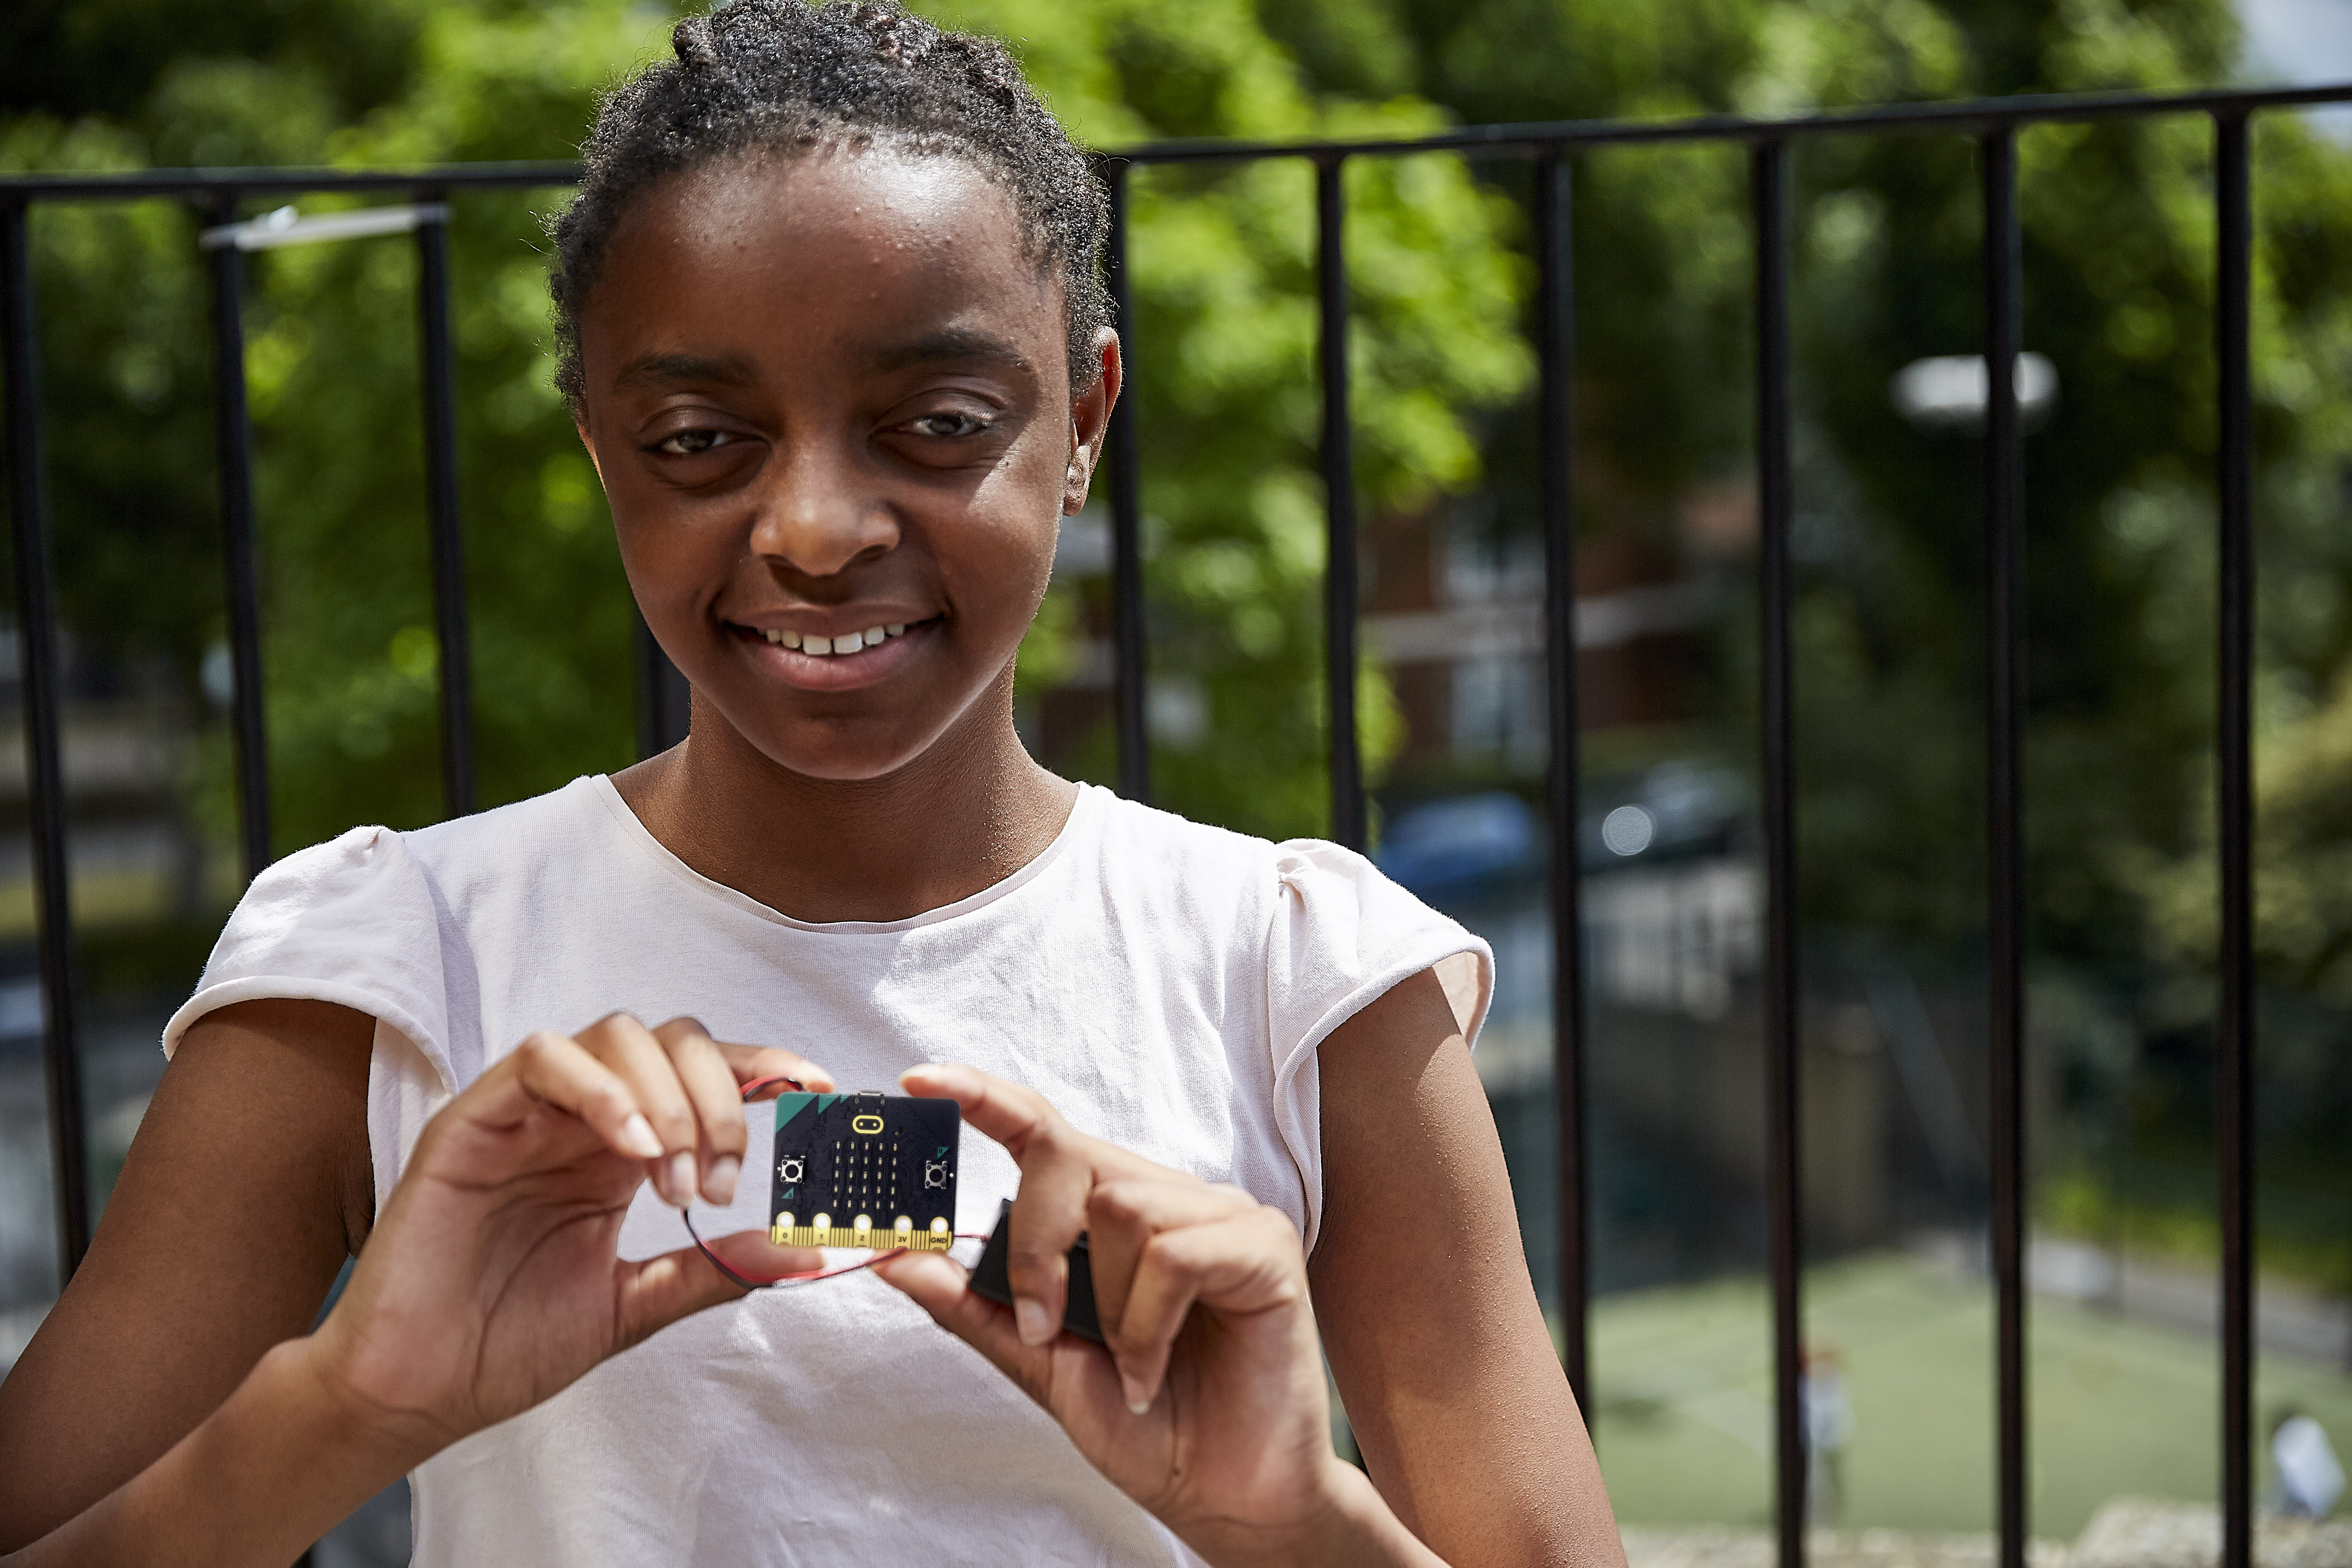 micro:bit first launched in 2016